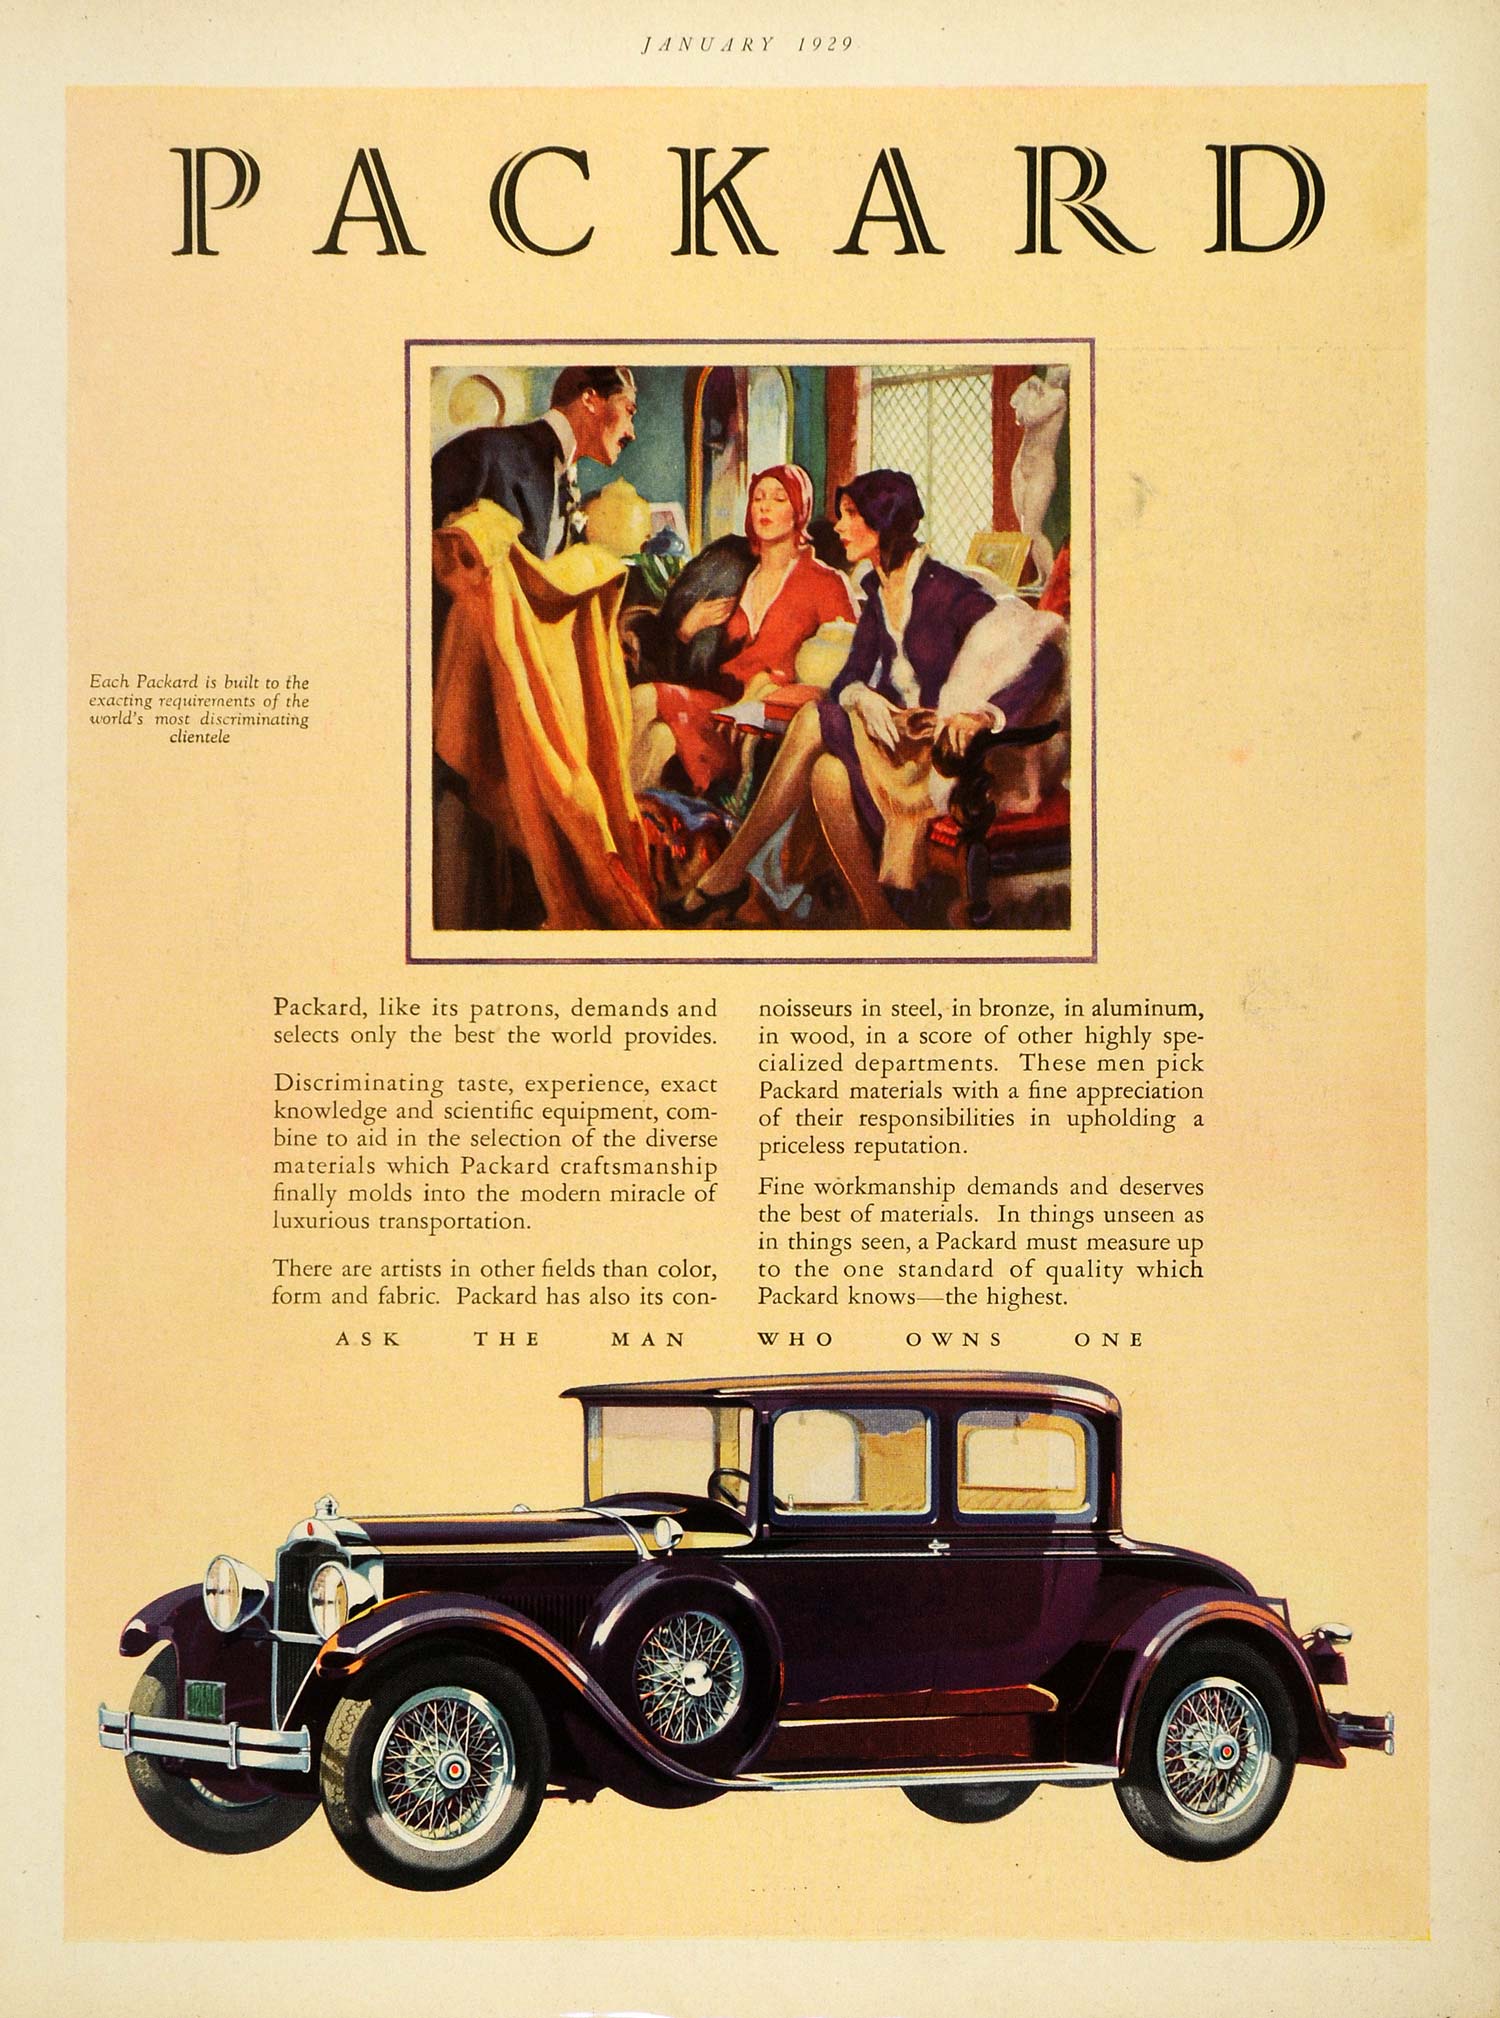 1929 Ad Packard Automobile Vehicle Wealthy Social Dress Fashion Auto Car HB2